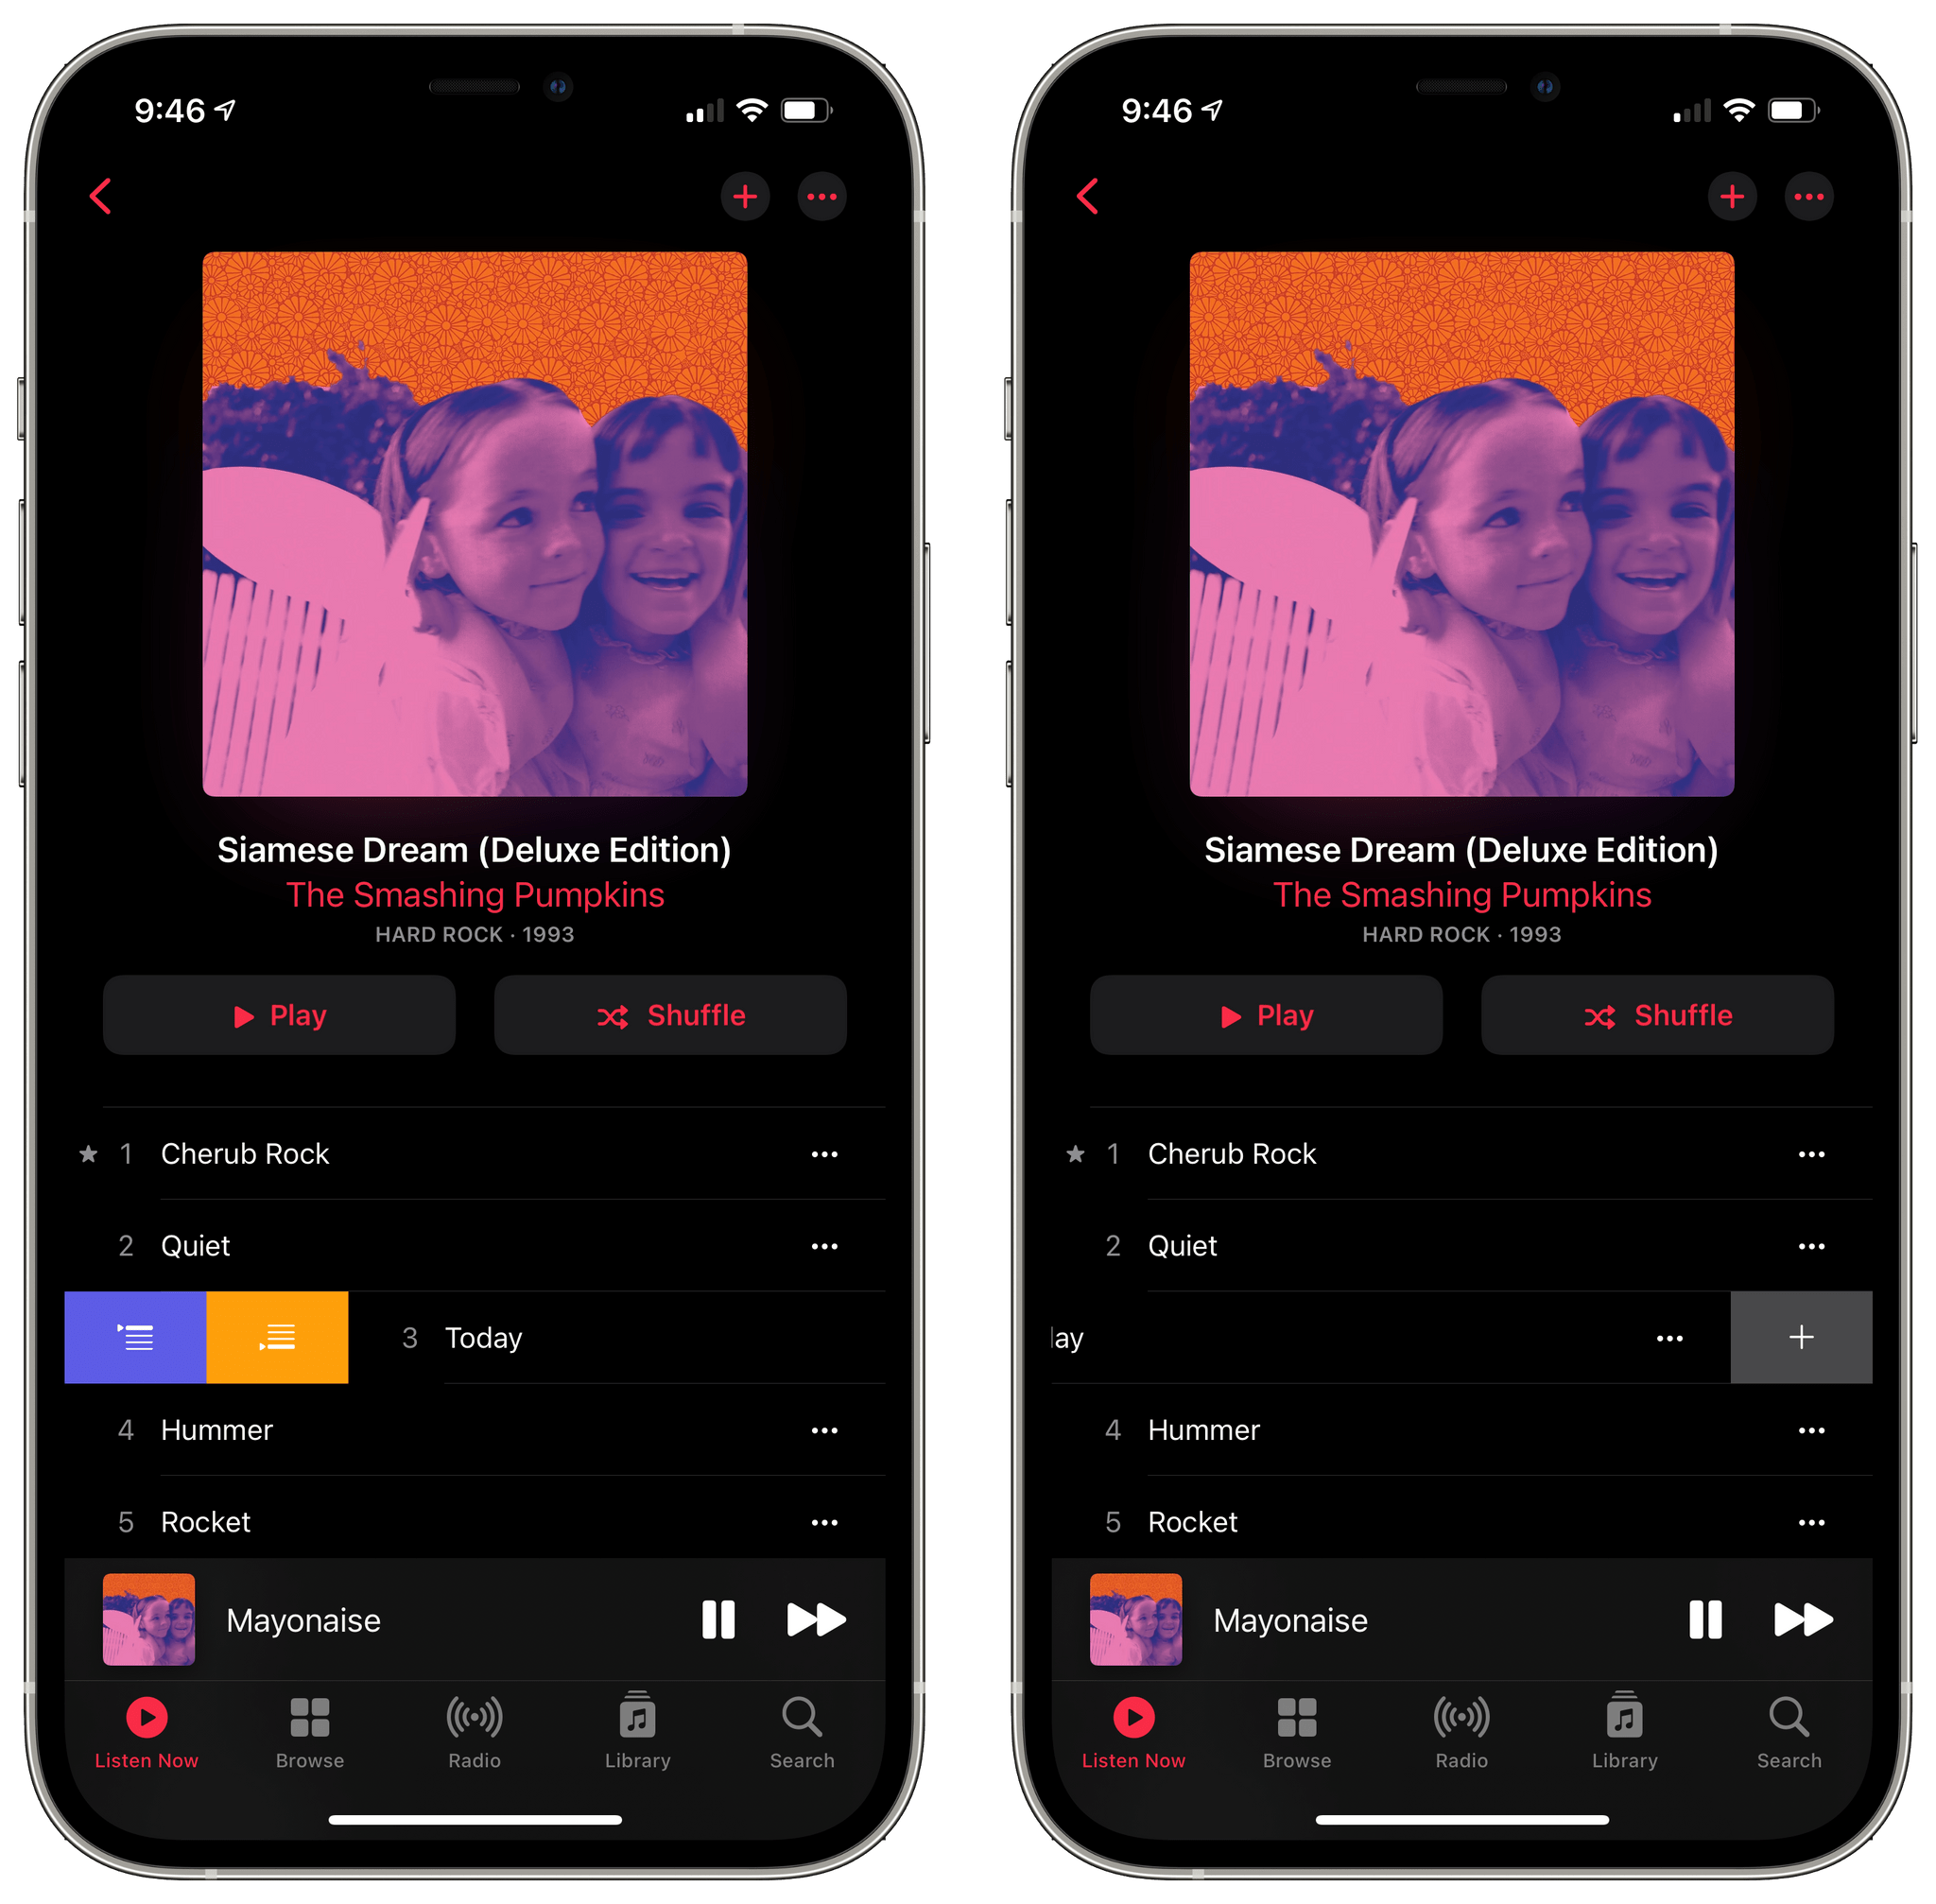 New swipe gestures in the Music app for iOS 14.5.